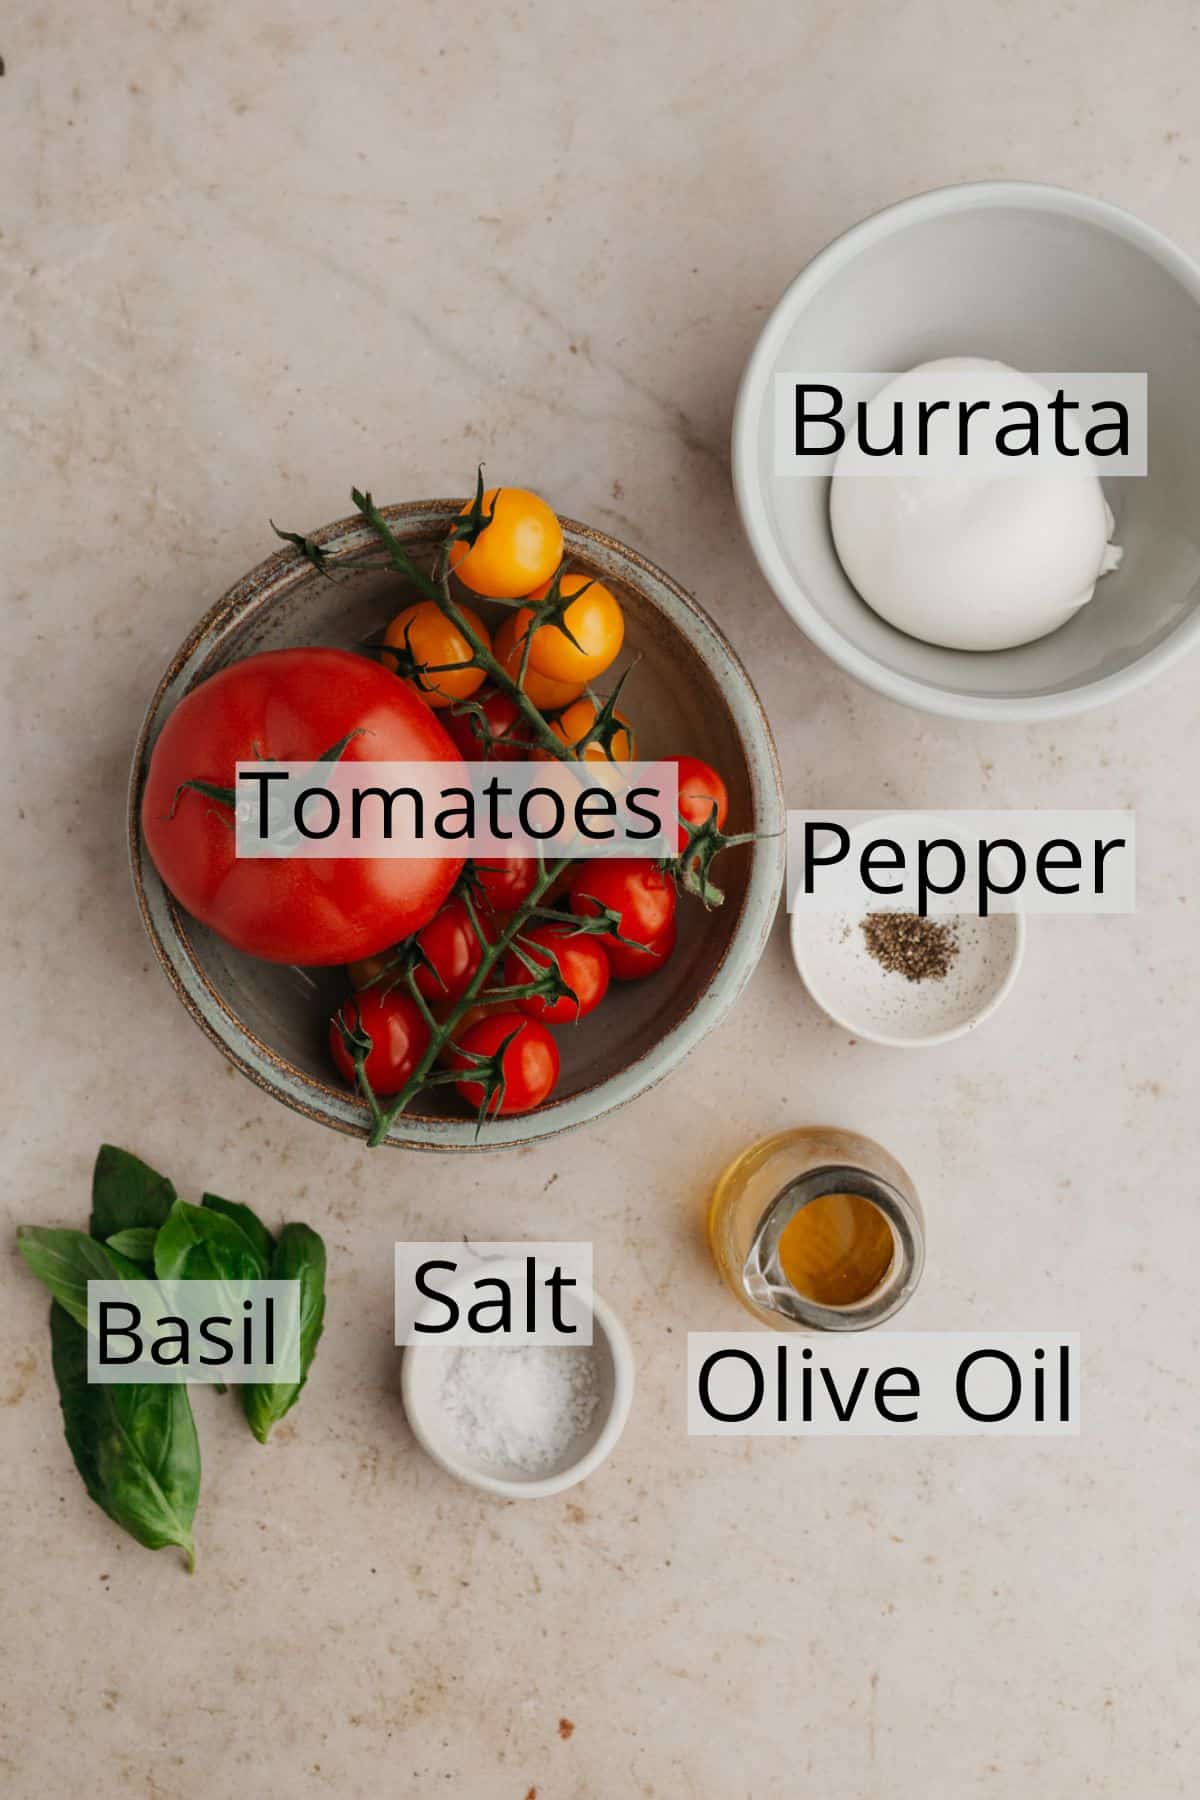 All the ingredients needed to make burrata caprese salad.